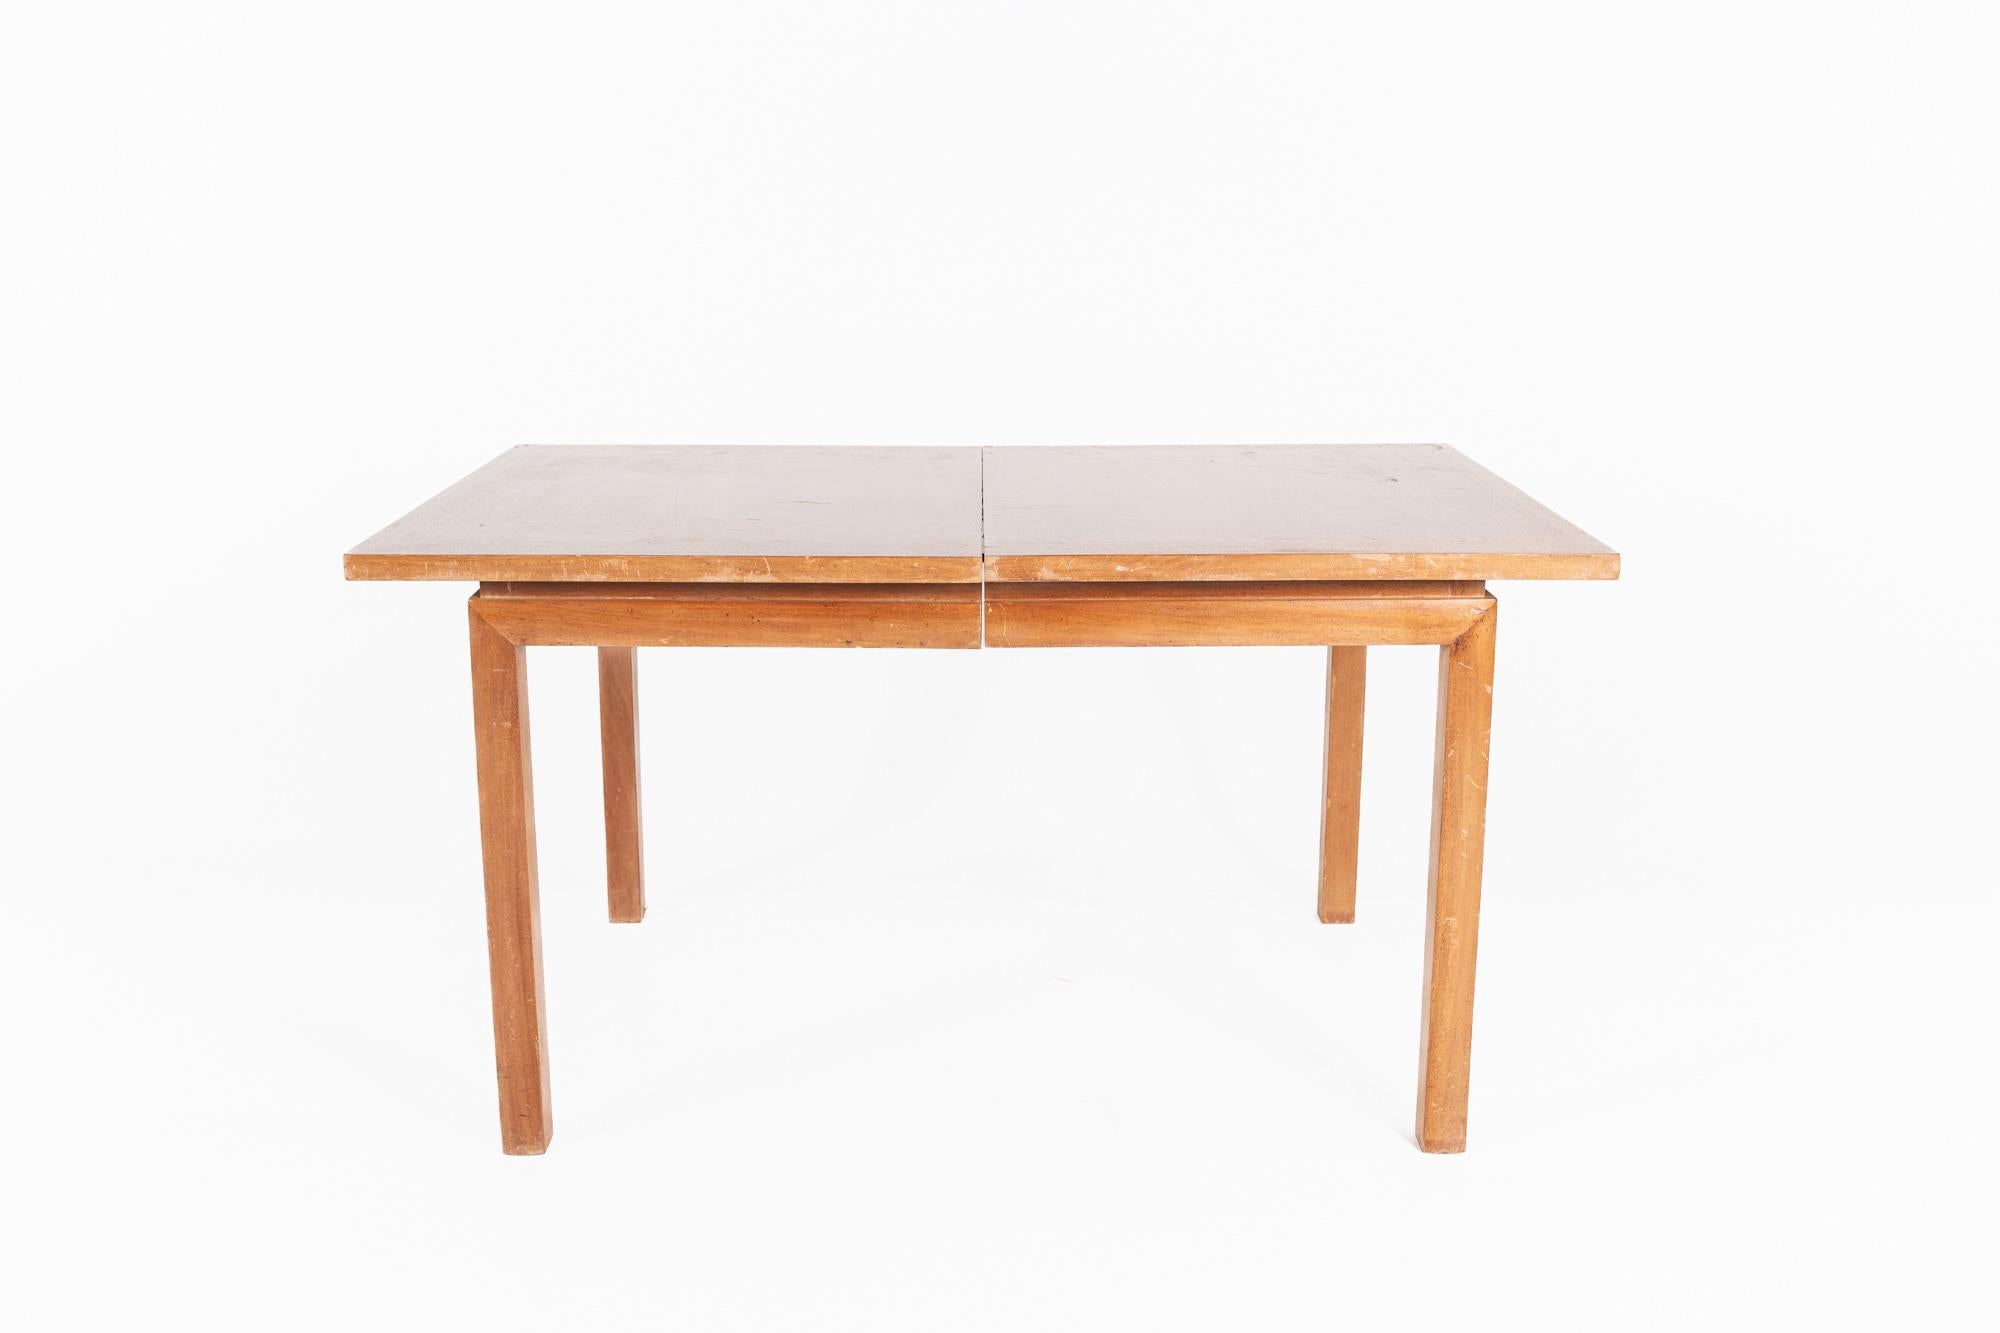 Merton Gershun for American of Martinsville style mid century blonde dining table

The table measures: 56 wide x 34 deep x 29.5 high, with a chair clearance of 25 inches

All pieces of furniture can be had in what we call restored vintage